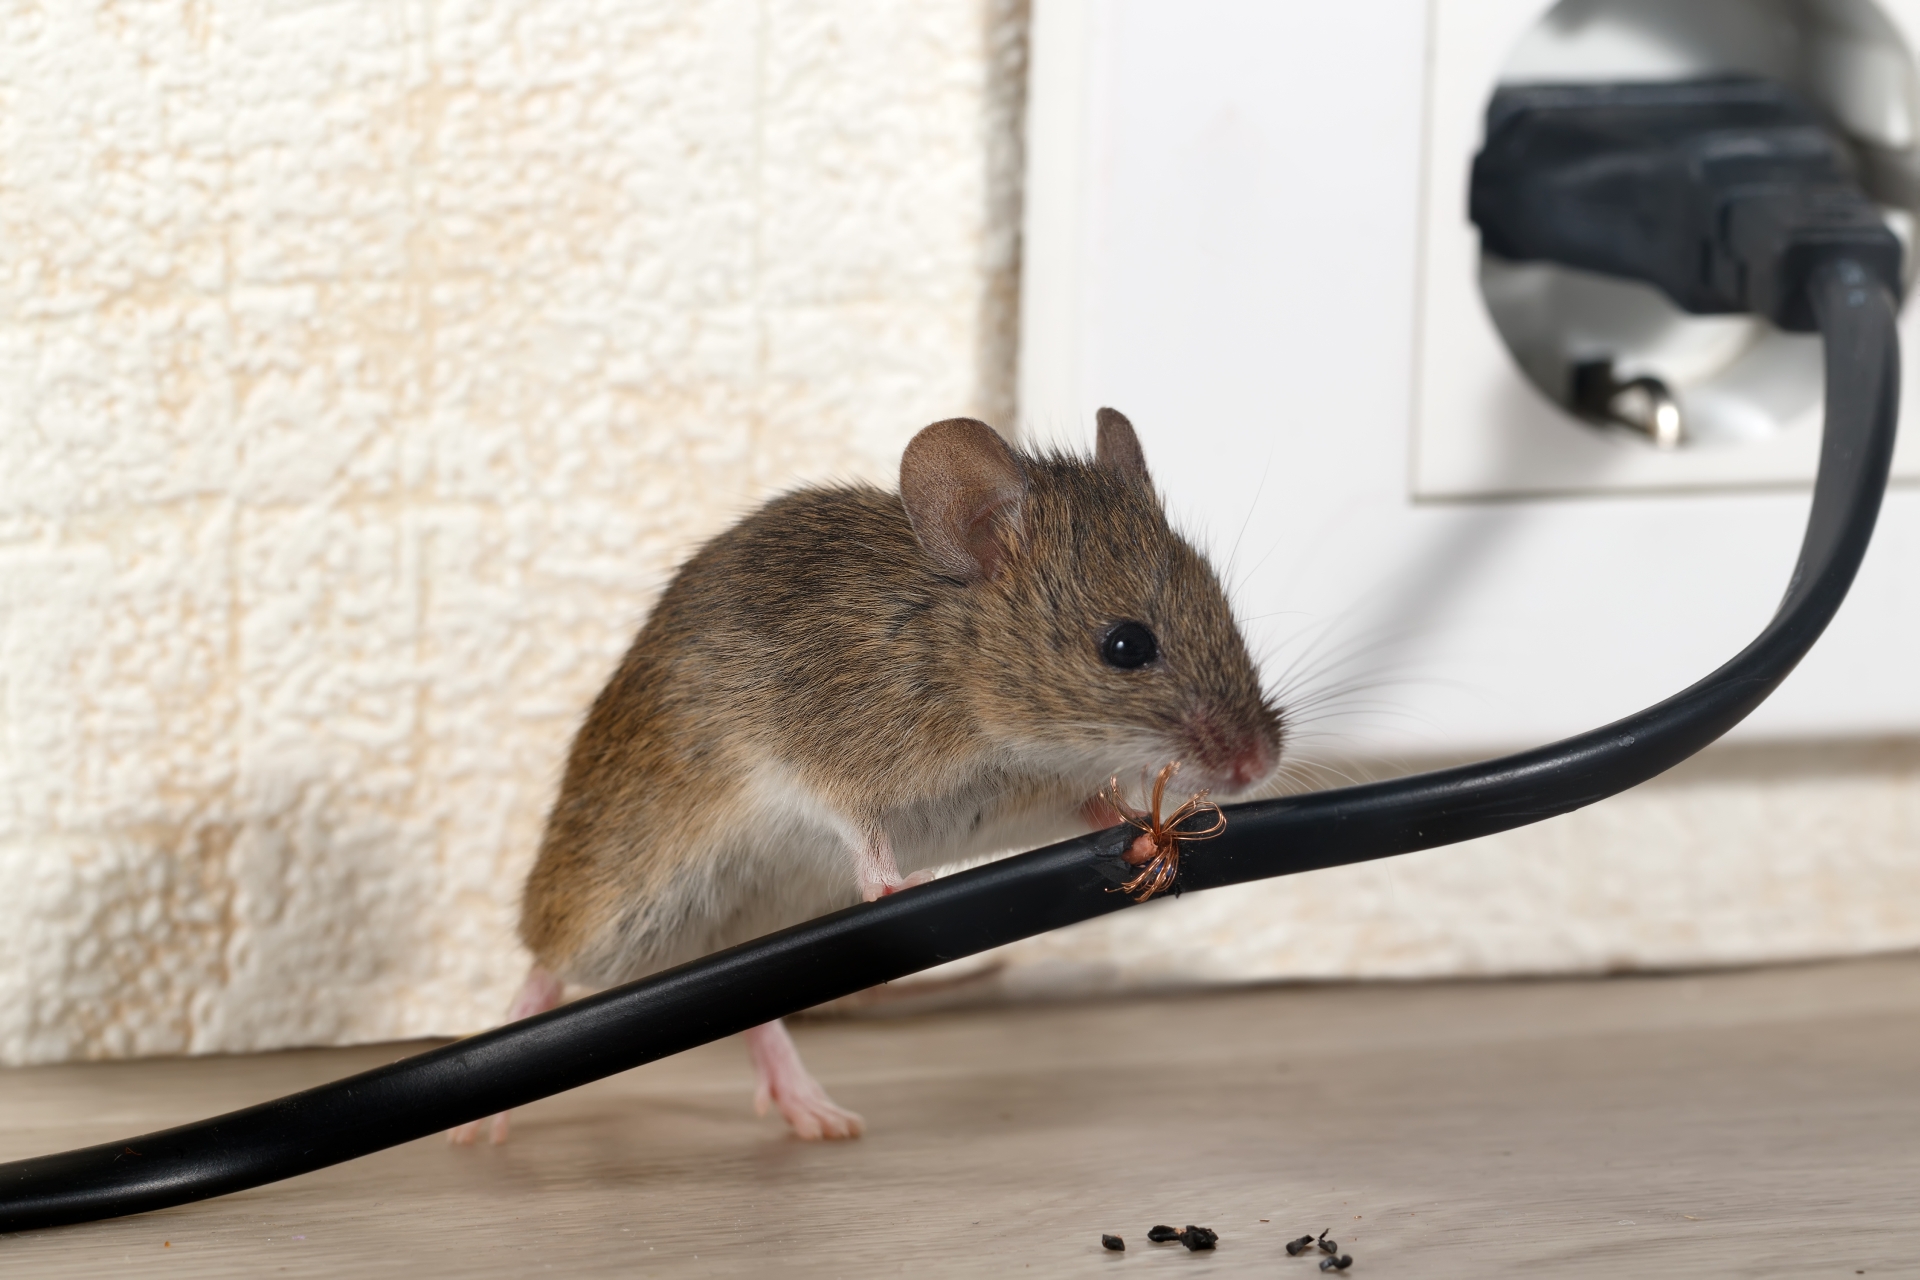 Mice Infestation, Pest Control in Erith, Northumberland Heath, DA8. Call Now 020 8166 9746